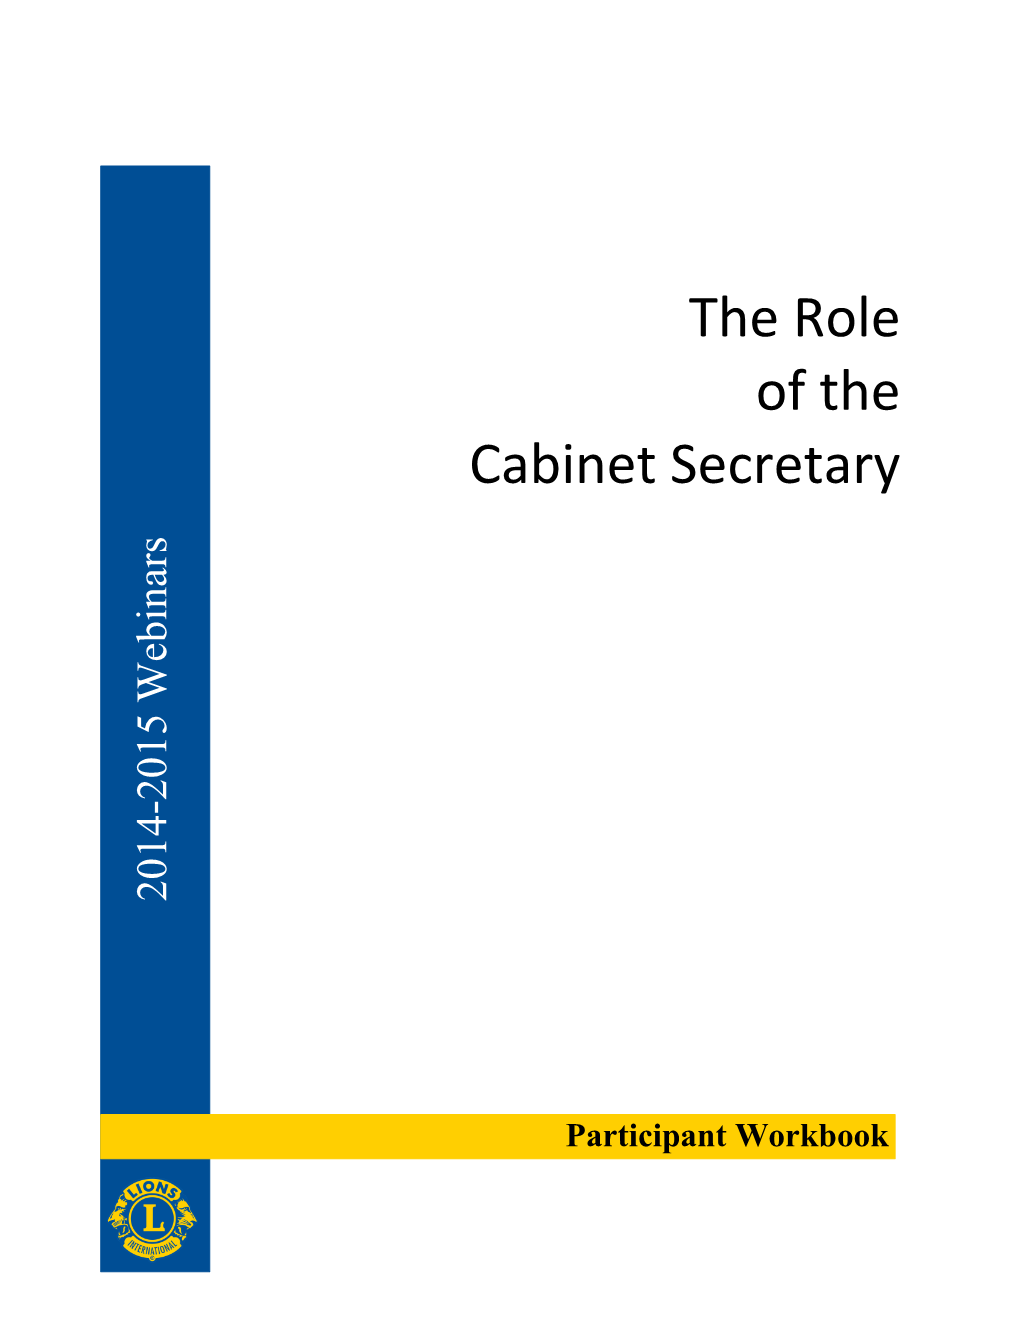 The Role of the Cabinet Secretary